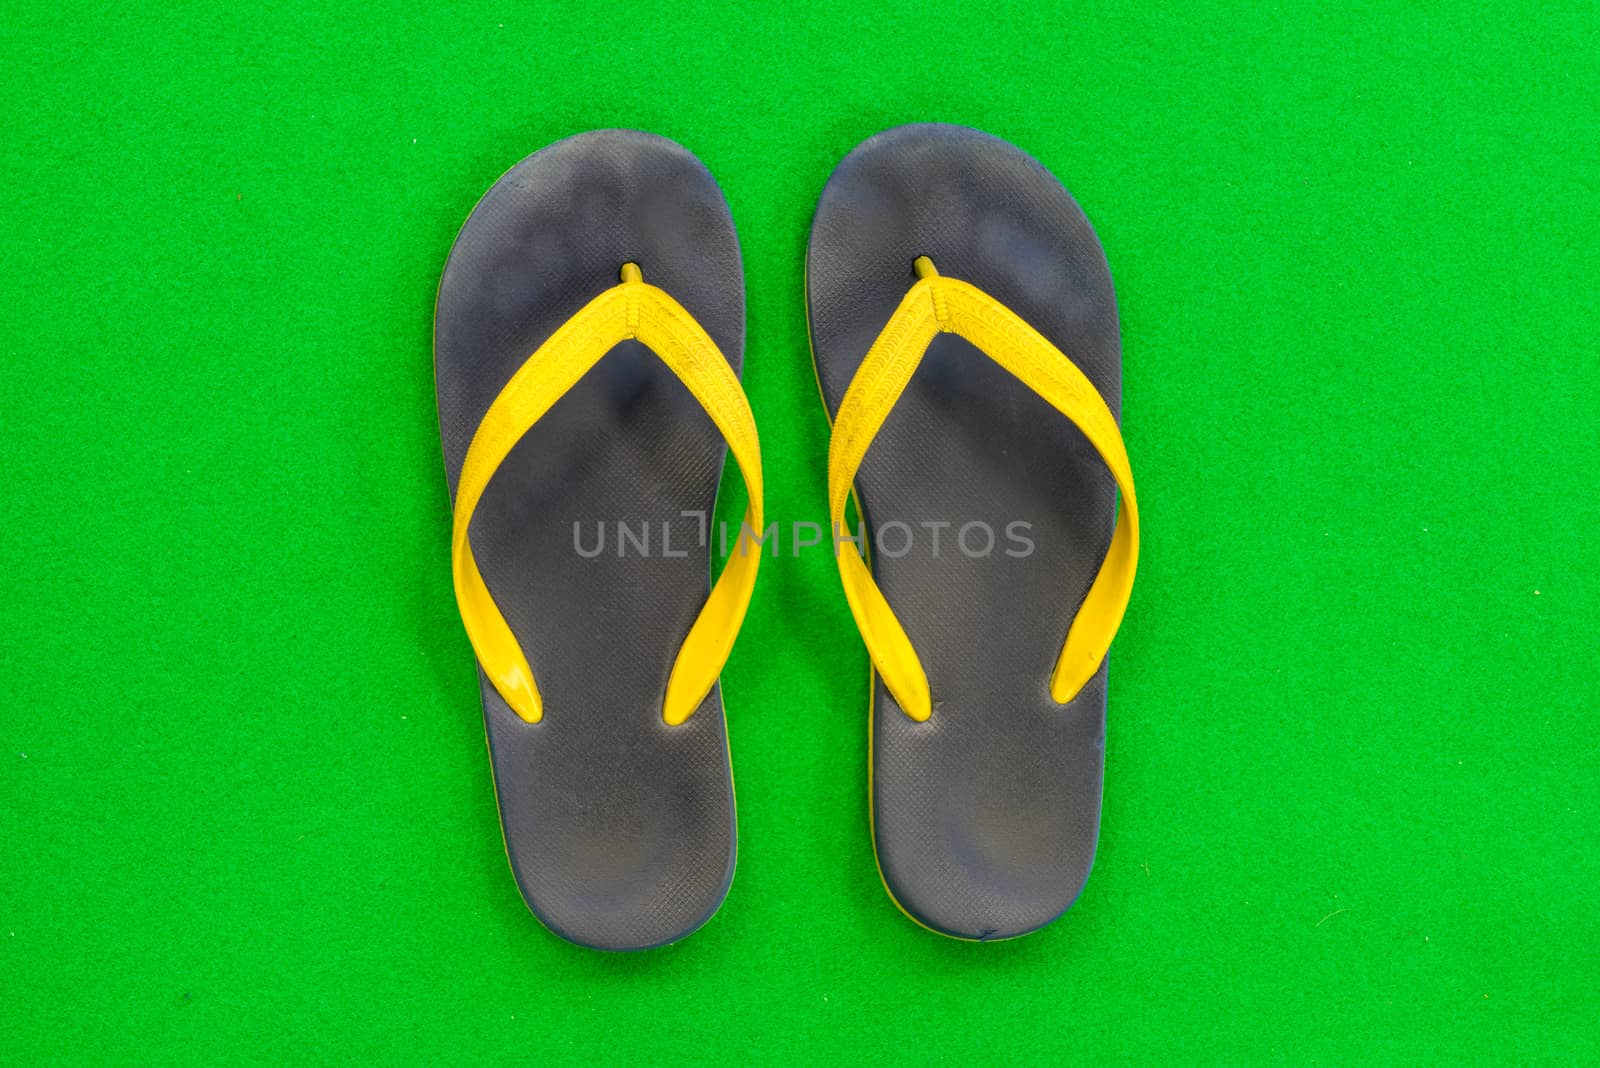 Rubber Slippers Placed on a green background by iamway